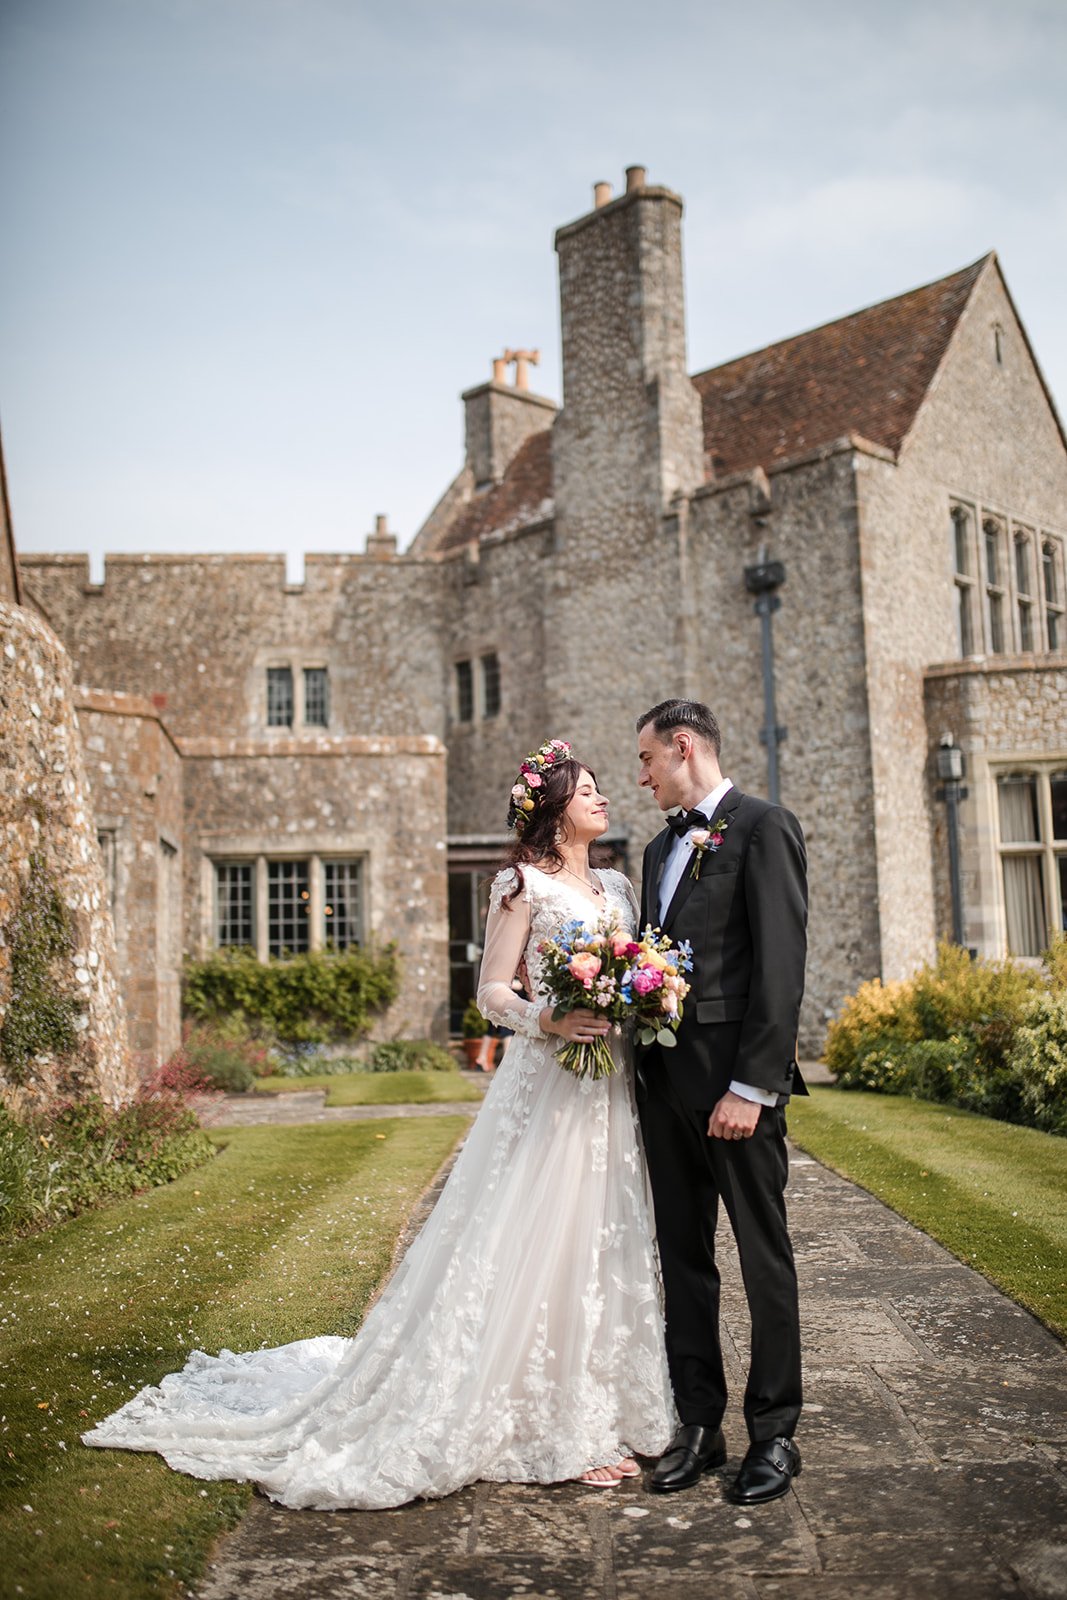 456 - Maddy + Ray, Lympne Castle Wedding - Florence Berry Photography-_websize.jpg